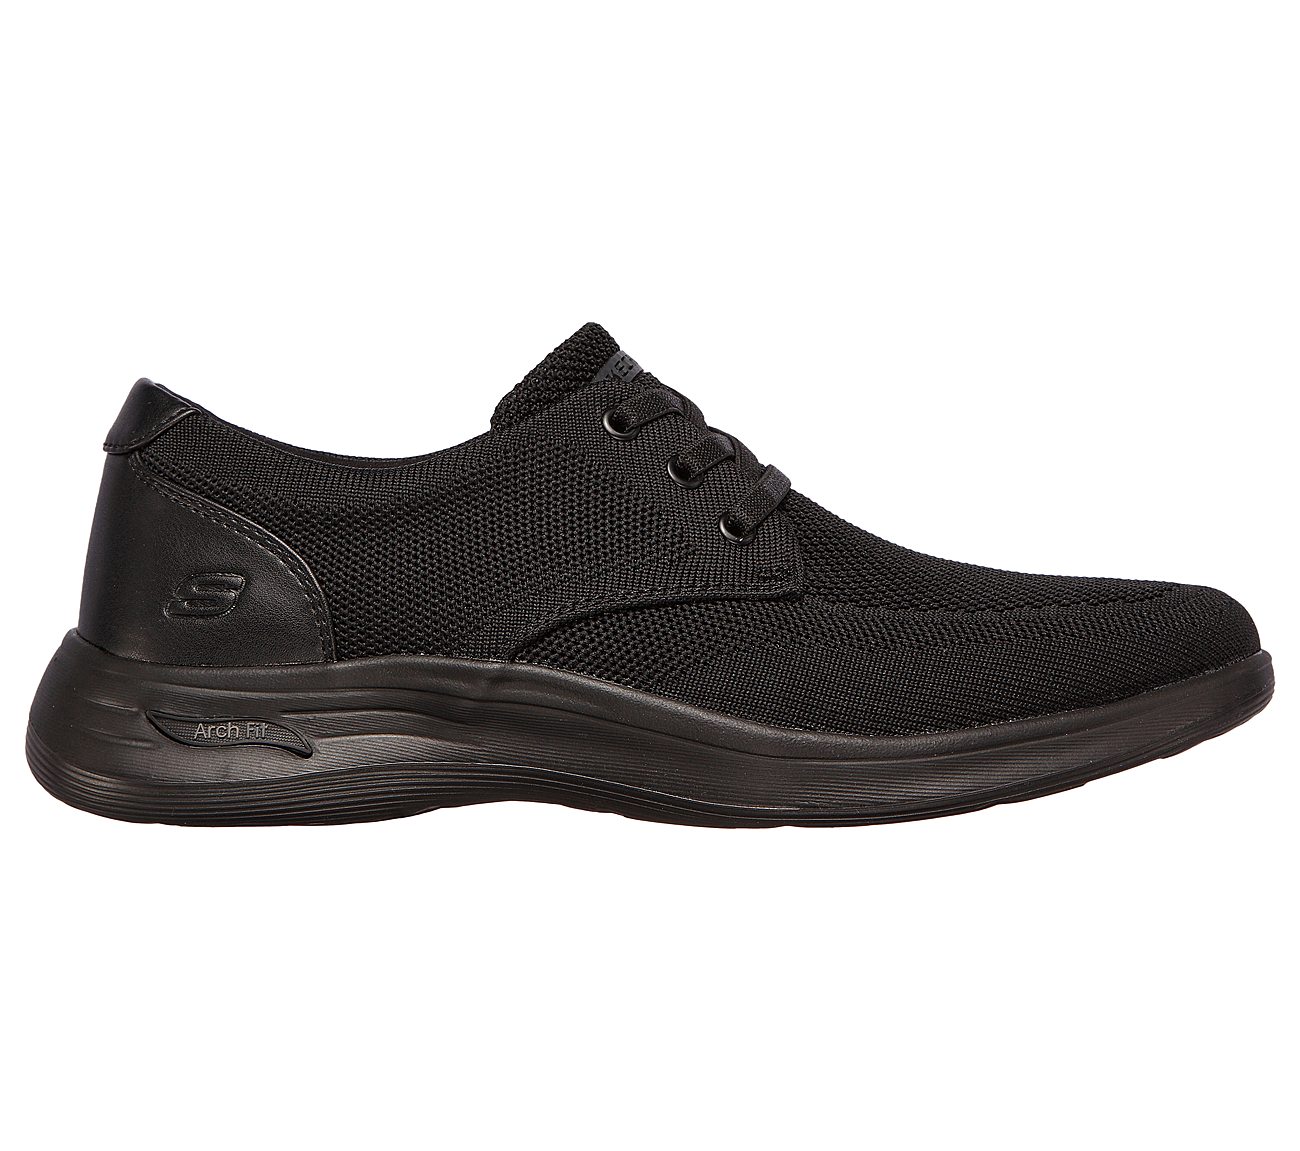 ARCH FIT DARLO - WEEDON, BBLACK Footwear Right View